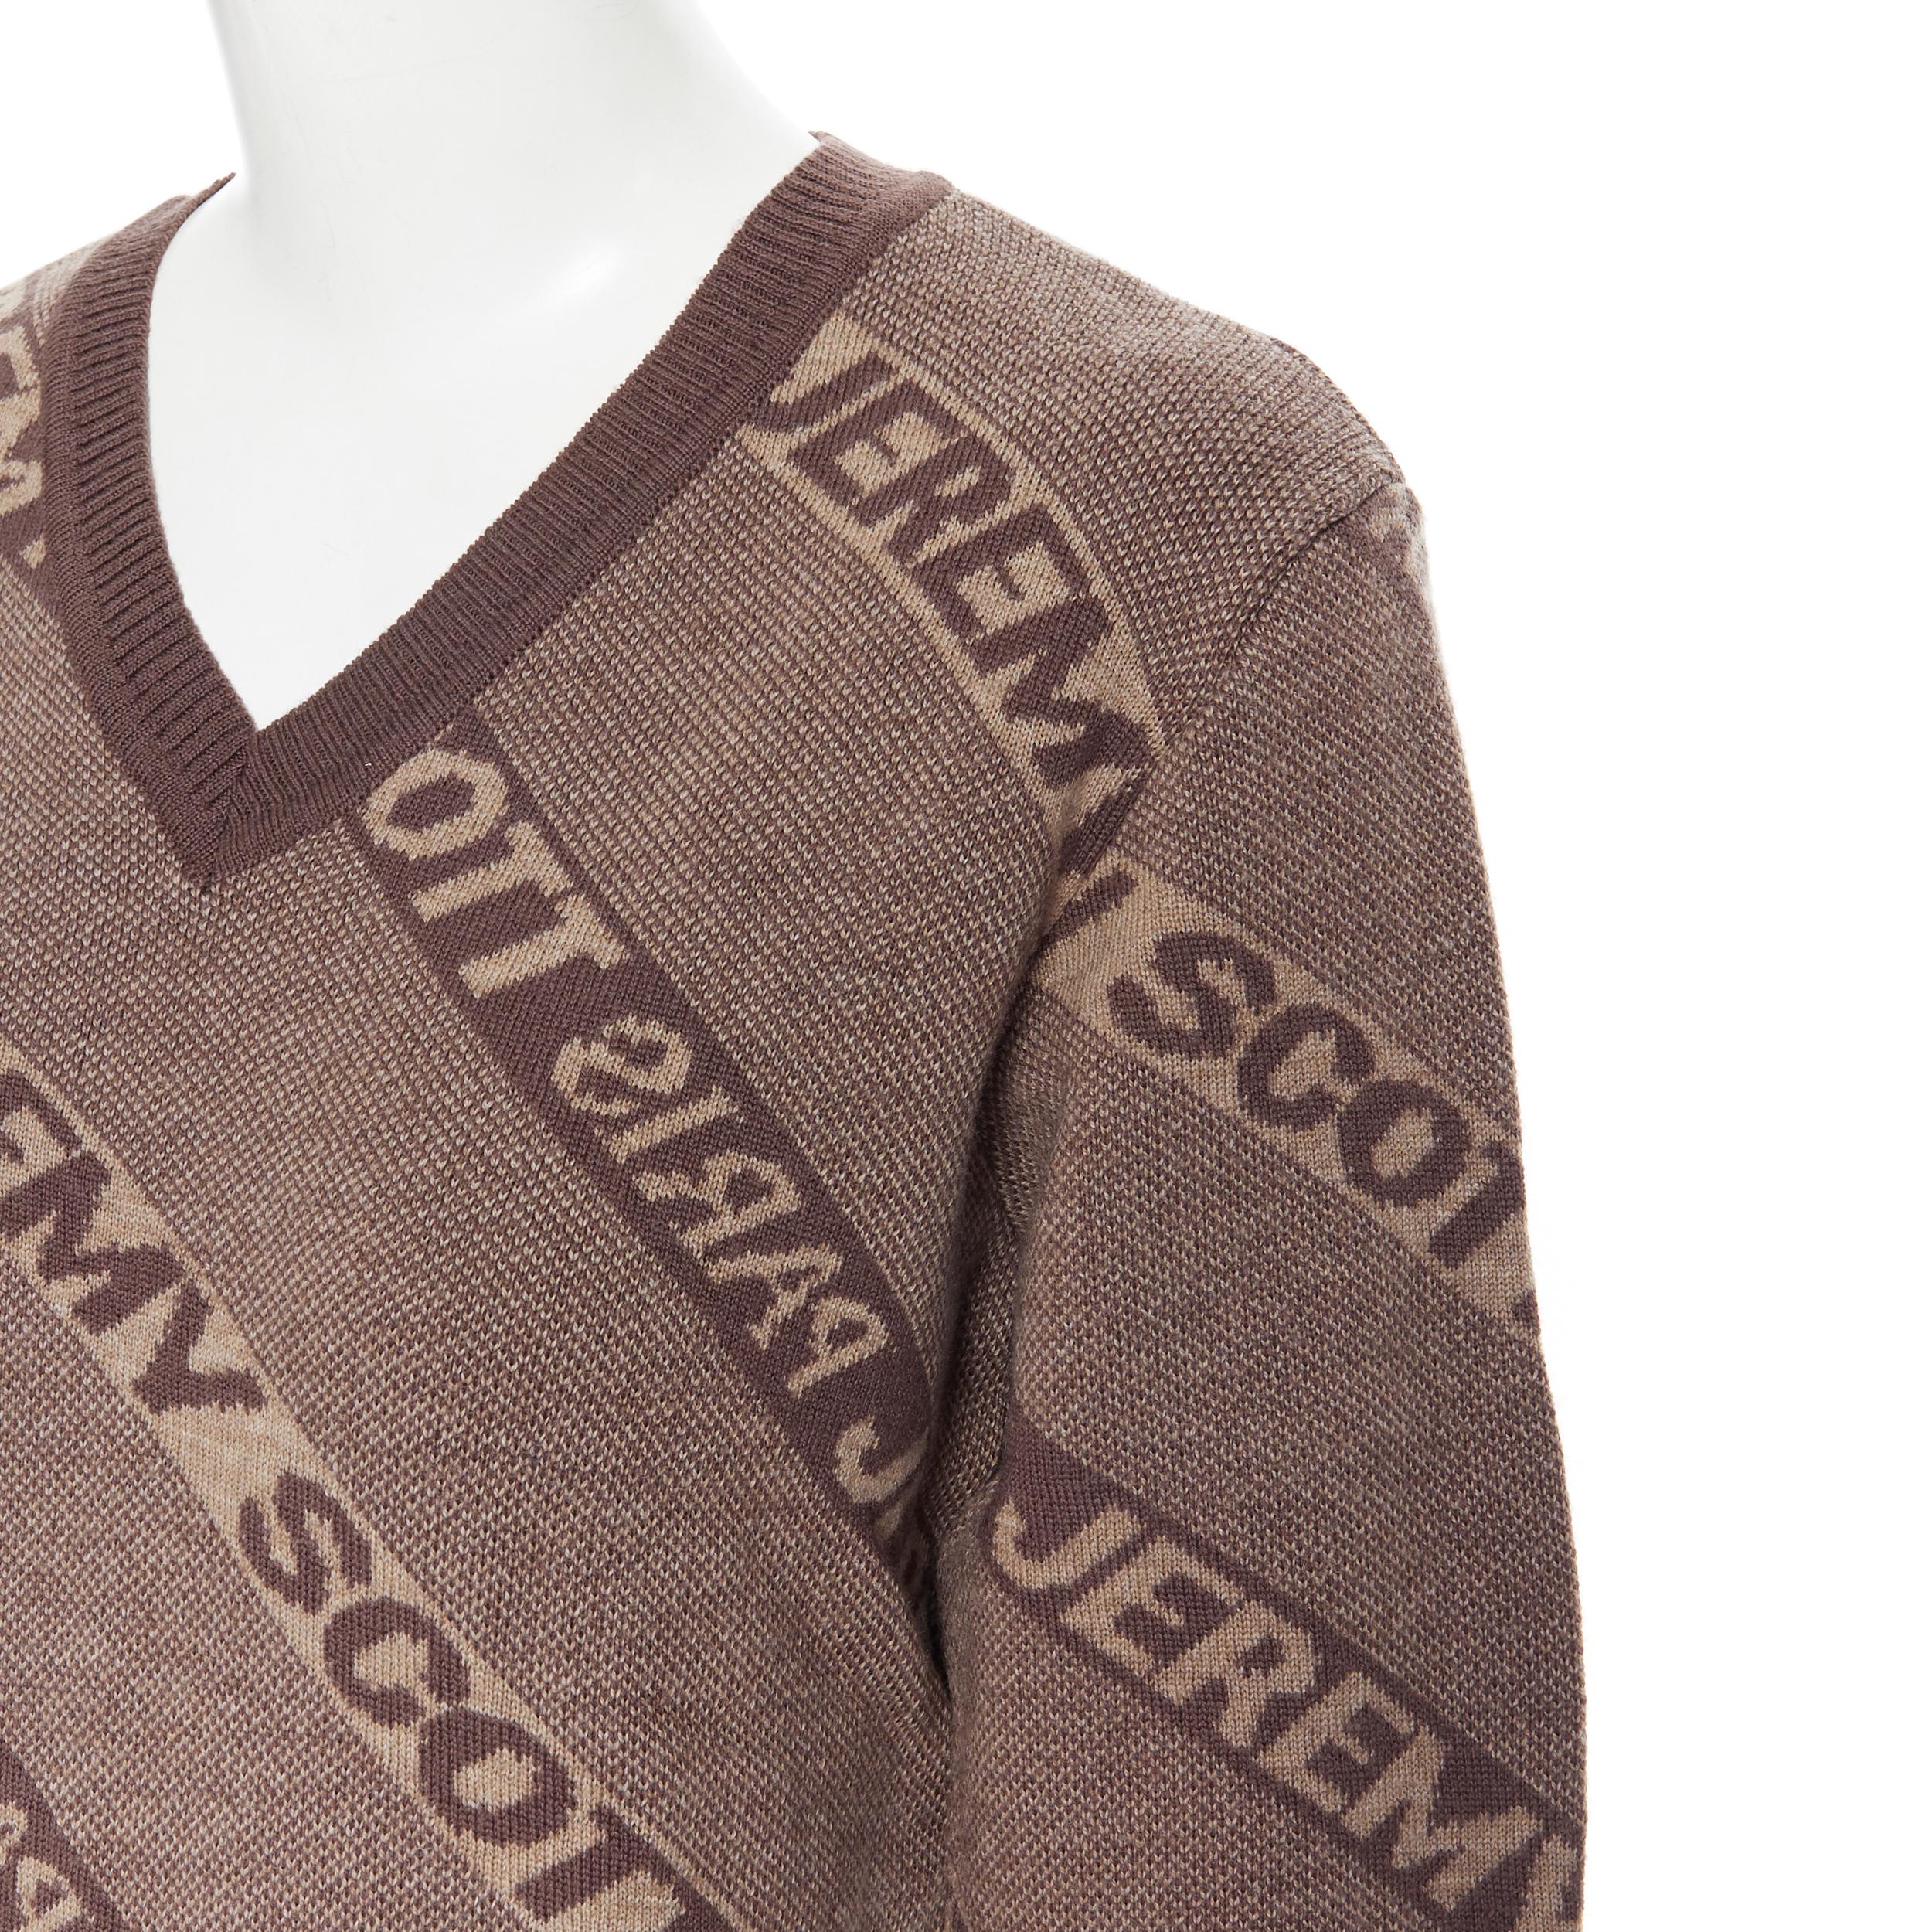 vintage JEREMY SCOTT PARIS brown logo intarsia merino wool short sweater S
Brand: Jeremy Scott
Designer: Jeremy Scott
Model Name / Style: Logo sweater
Material: Wool
Color: Brown
Pattern: Striped
Extra Detail: Highly coveted and collectible